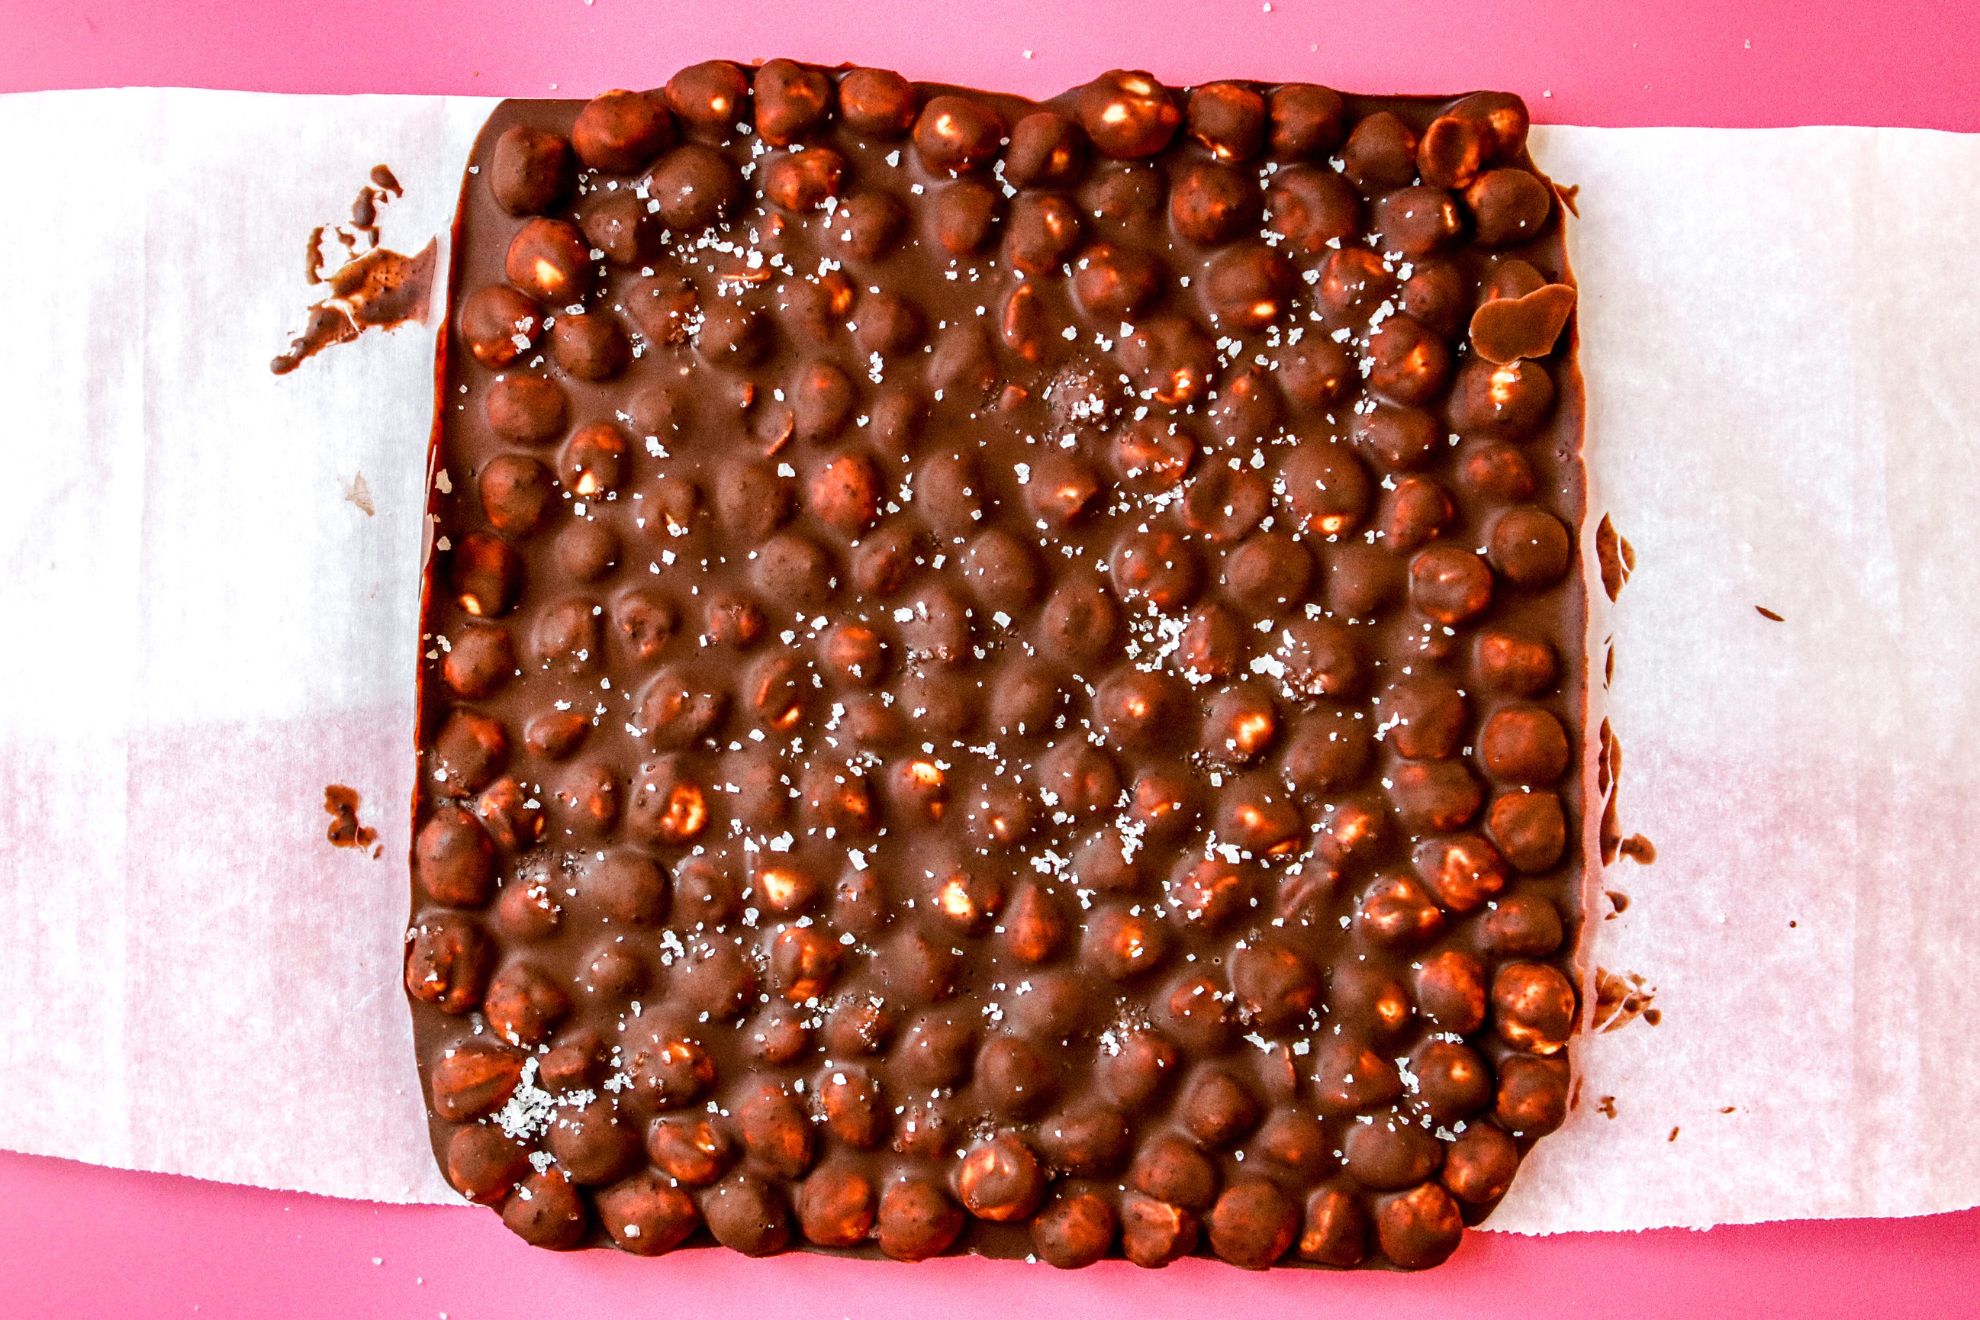 This is an overhead horizontal image of a square of chocolate with hazelnuts in it and flakey salt on top. The square oif chocolate sits on a white piece of parchment paper on top of a dark pink surface.